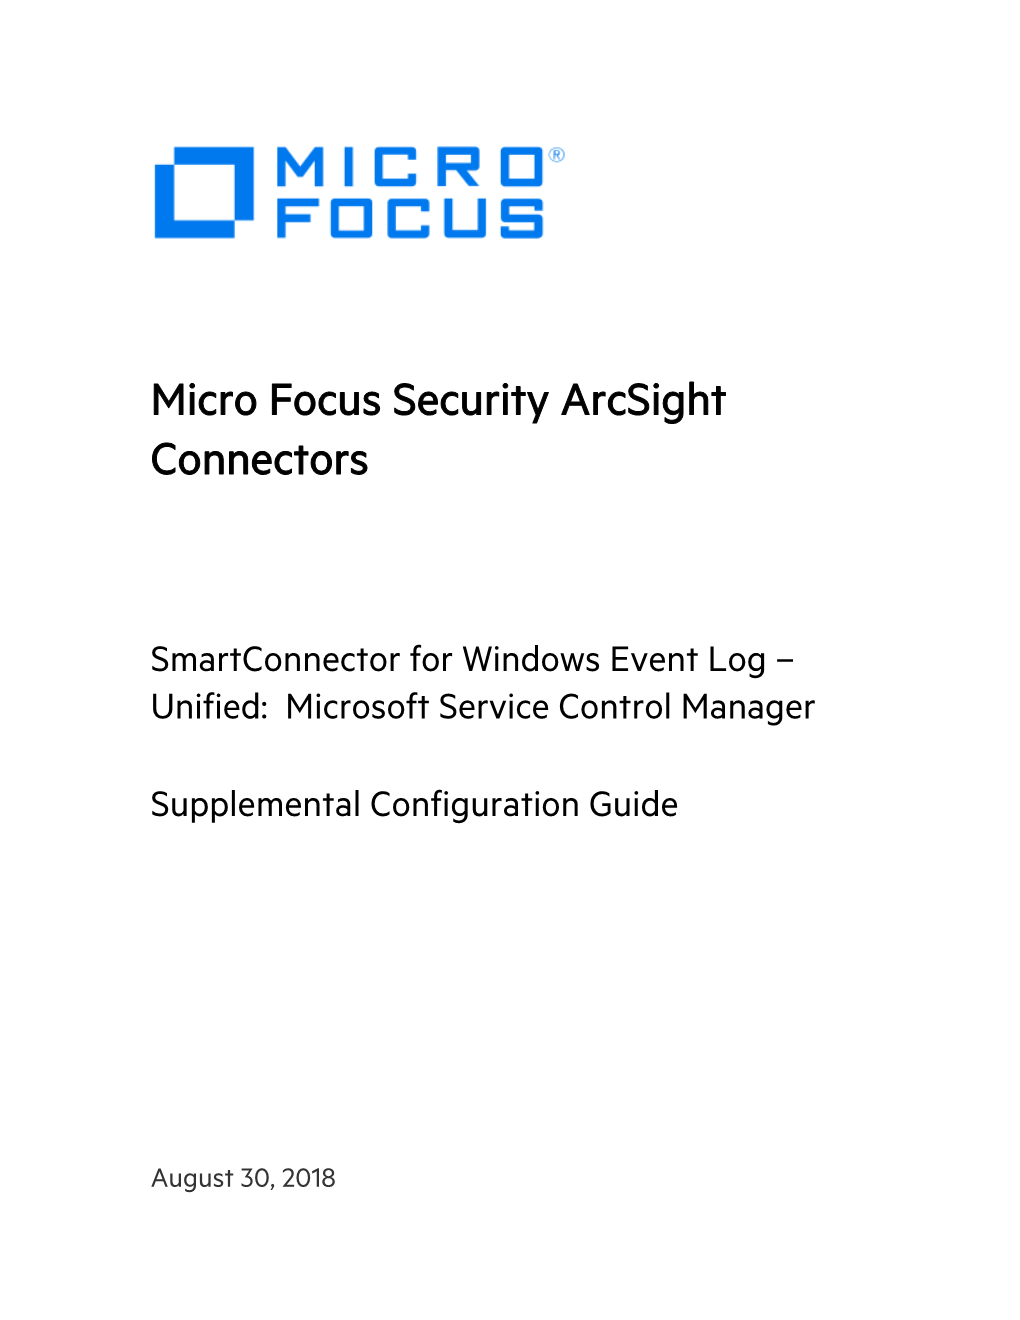 Smartconnector Configuration Guide for Microsoft Windows Event Log – Unified, Selecting Microsoft Windows Event Log – Unified As the Connector to Be Configured